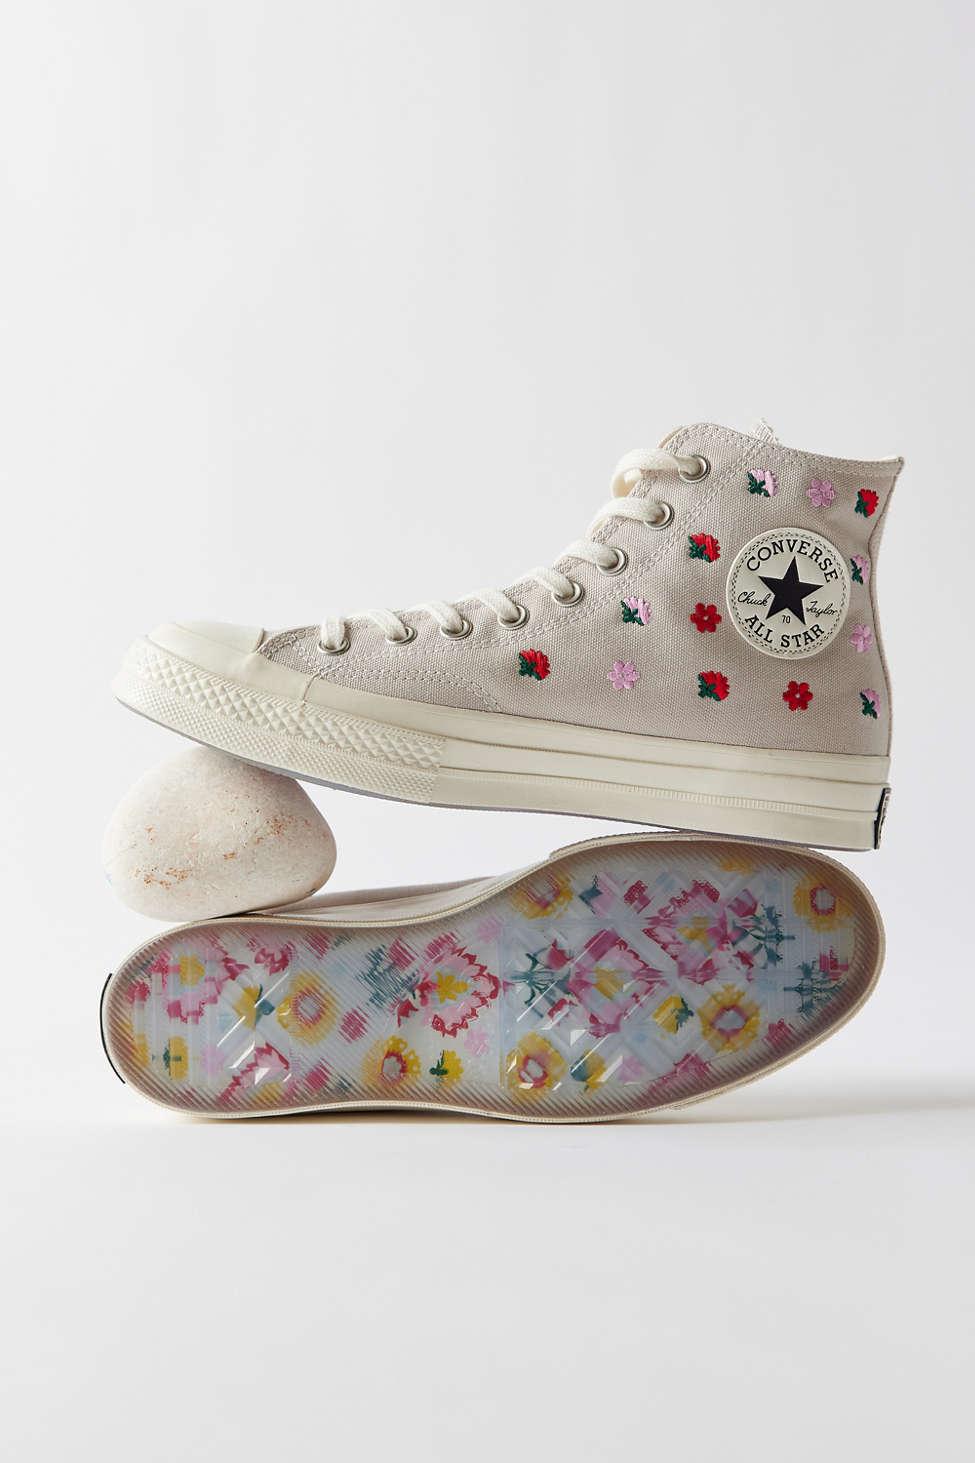 Converse Chuck 70 Floral Embroidery High Top Sneaker | Lyst